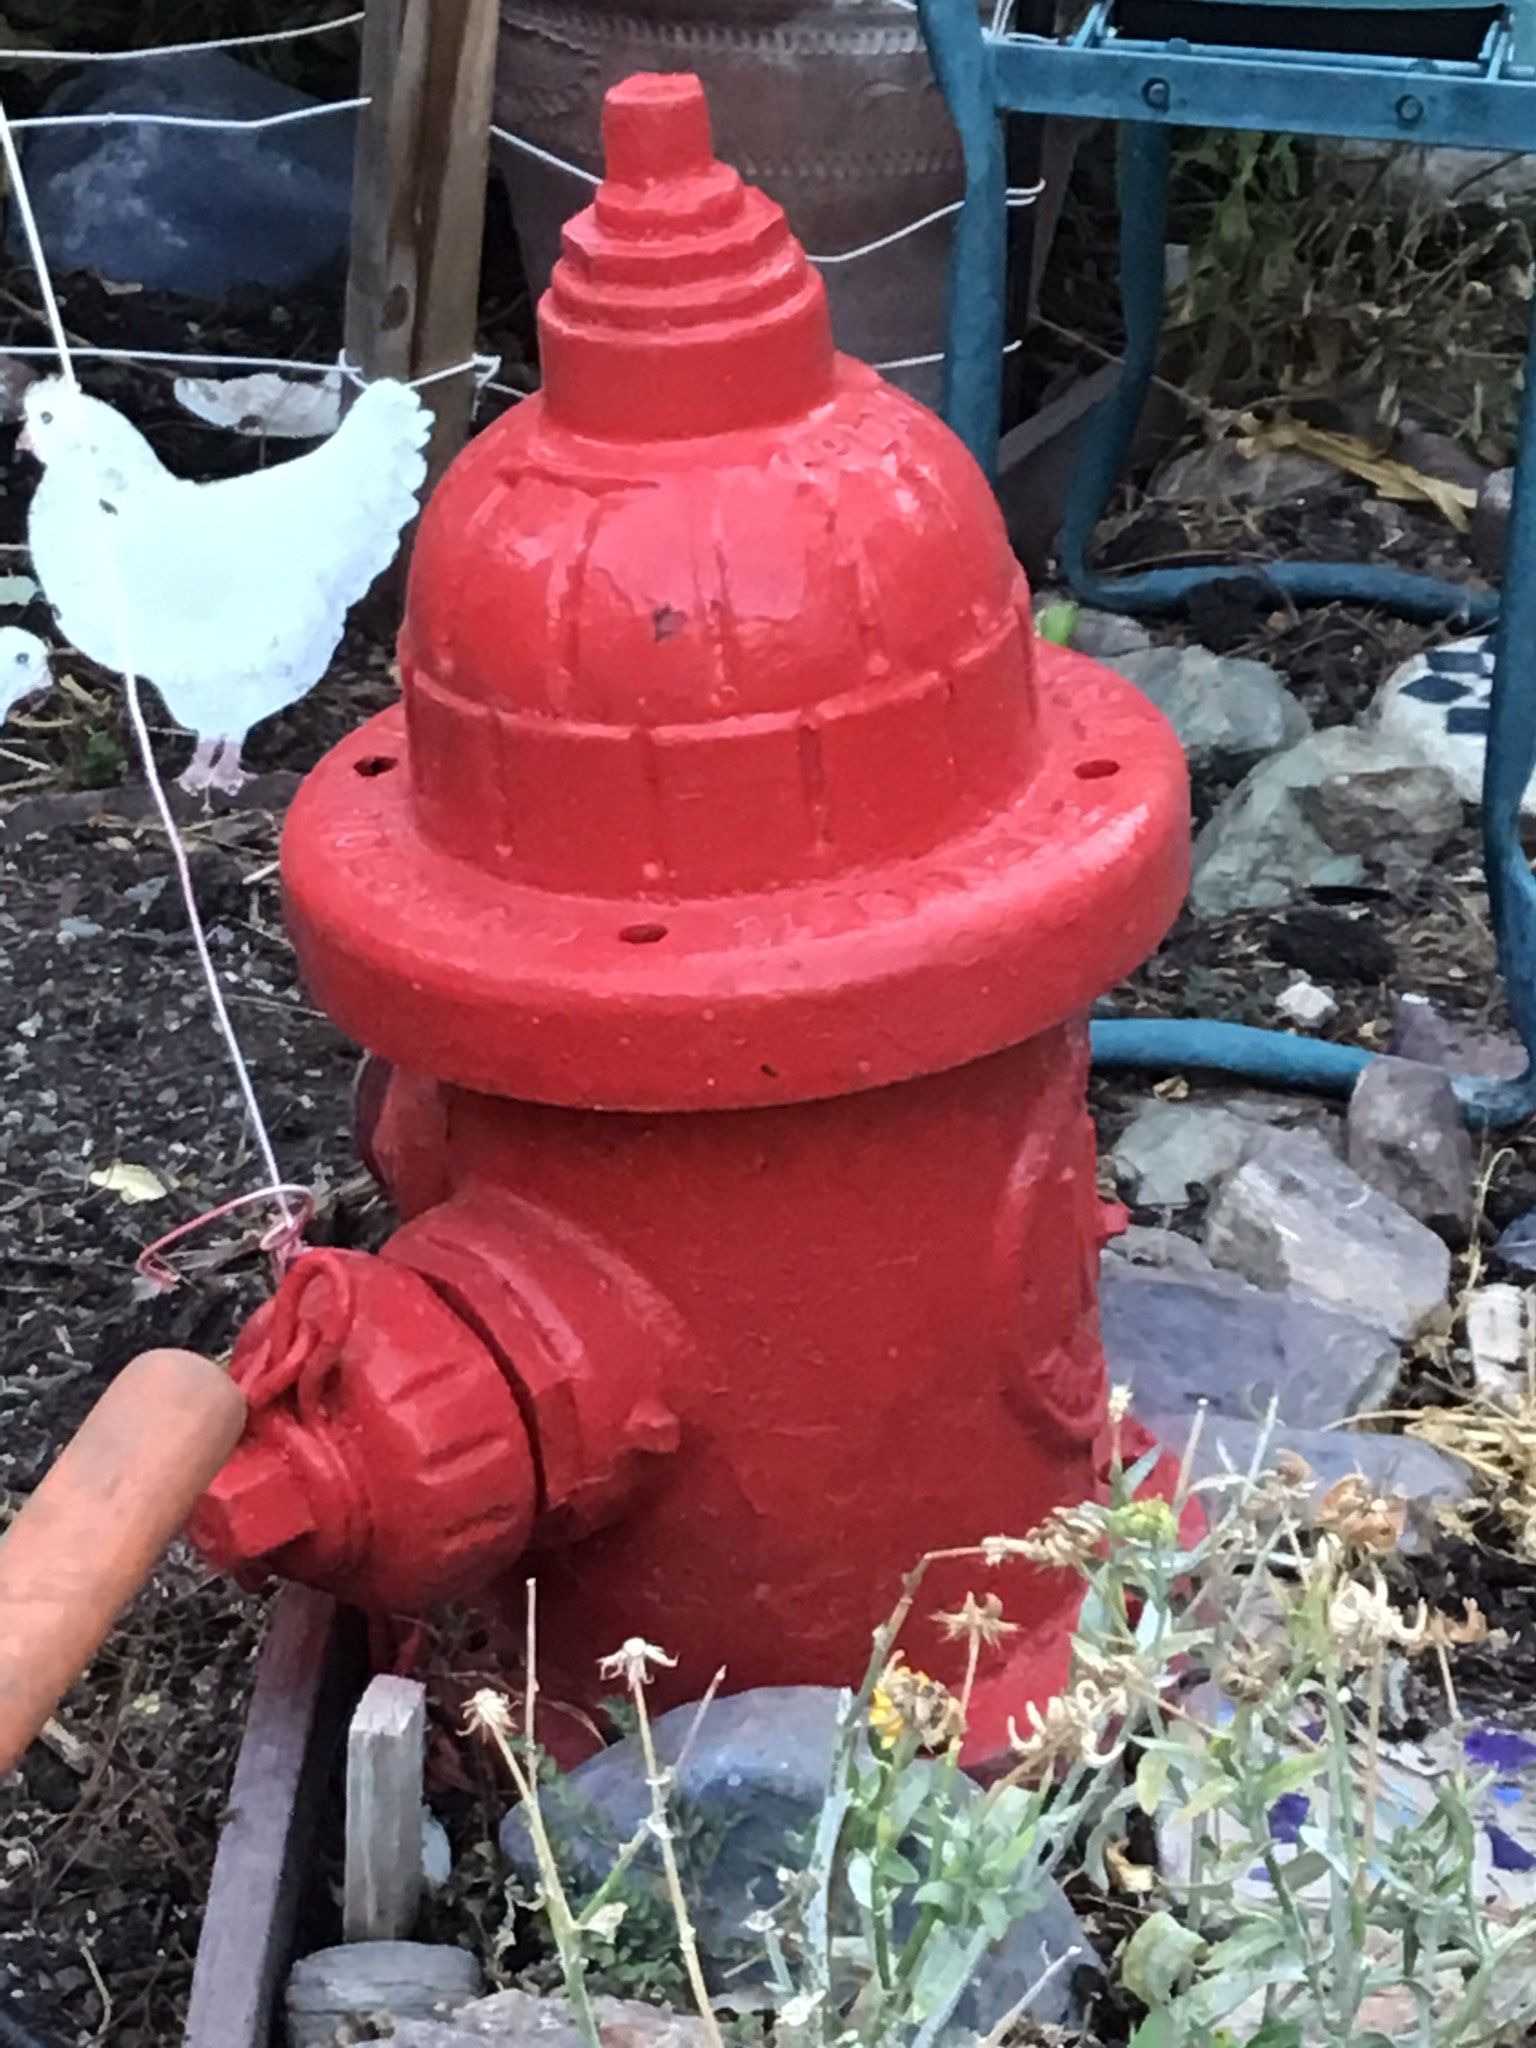 Real fire hydrant